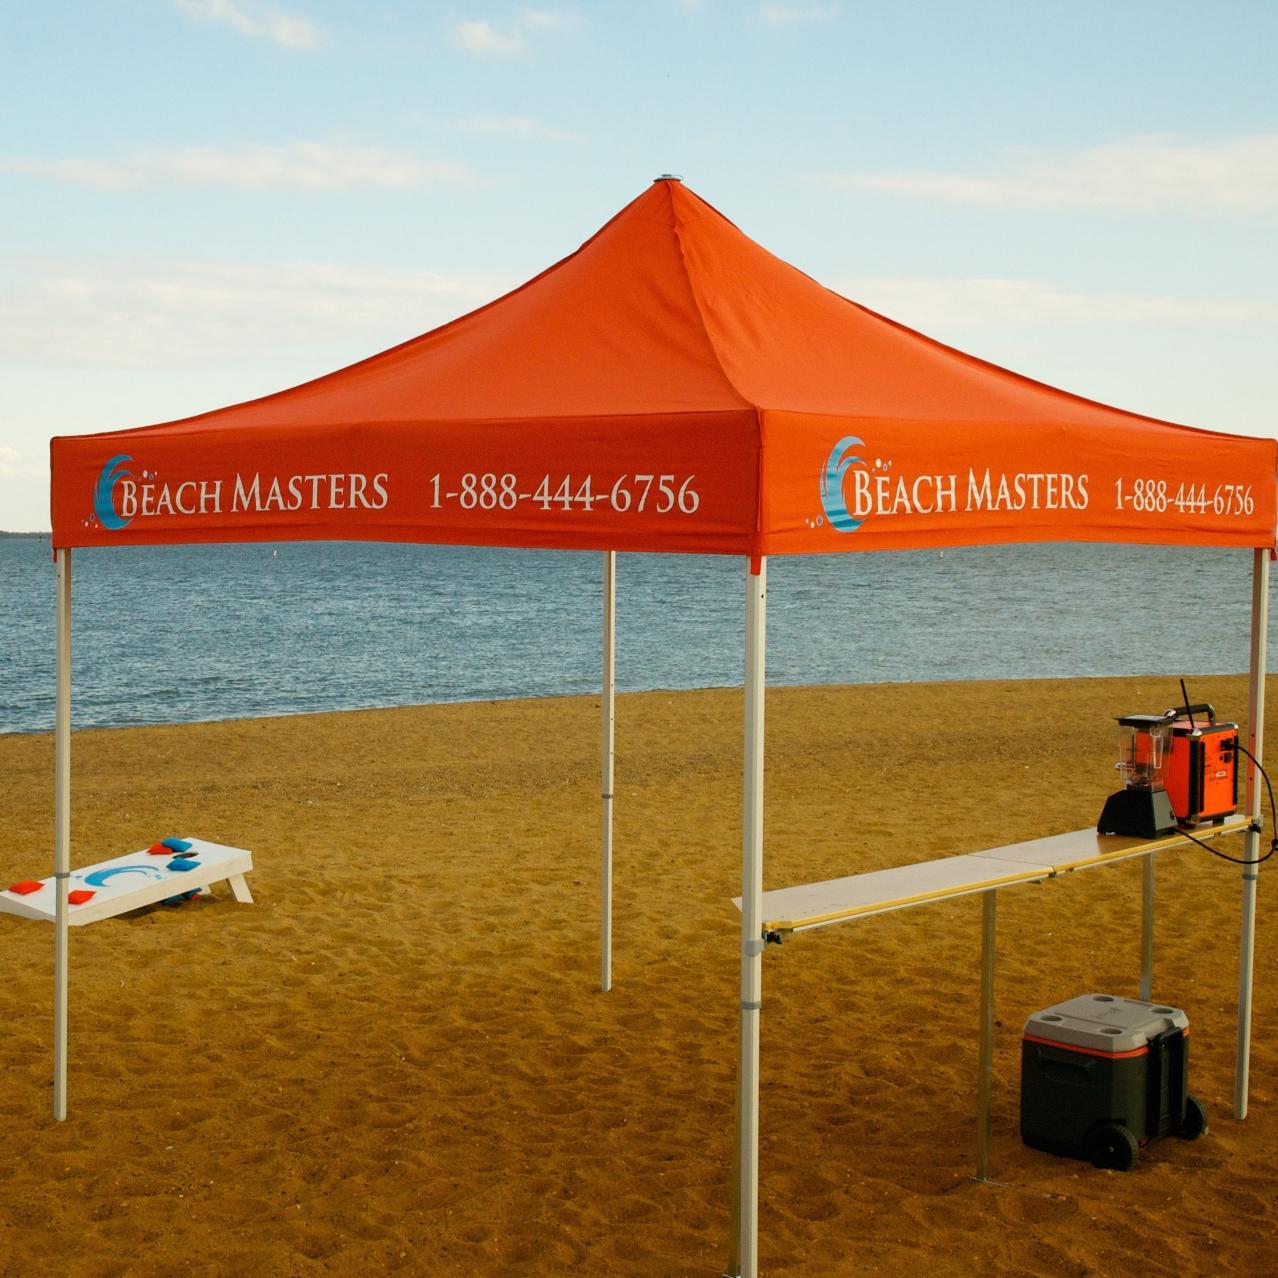 BeachMasters takes your OBX experience to a whole new level.  We set up the tent w/ counter, blender, Bluetooth speaker, cooler w/ ice and cornhole everyday.